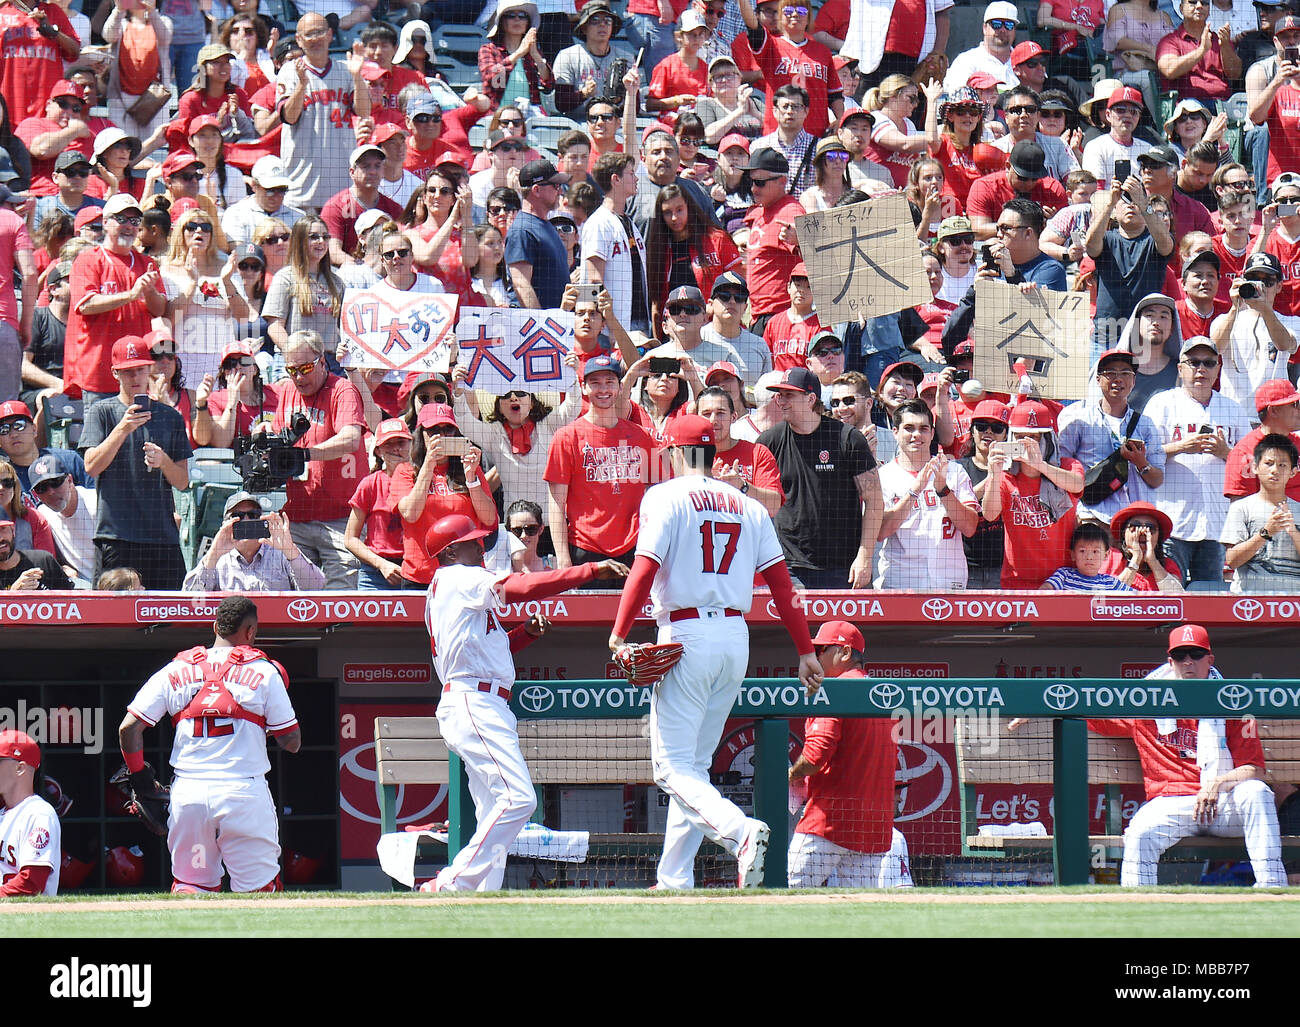 Fans cheer as Los Angeles Angels starting pitcher Shohei Ohtani walks back to the dugout after the top of the second inning during the Major League Baseball game against the Oakland Athletics